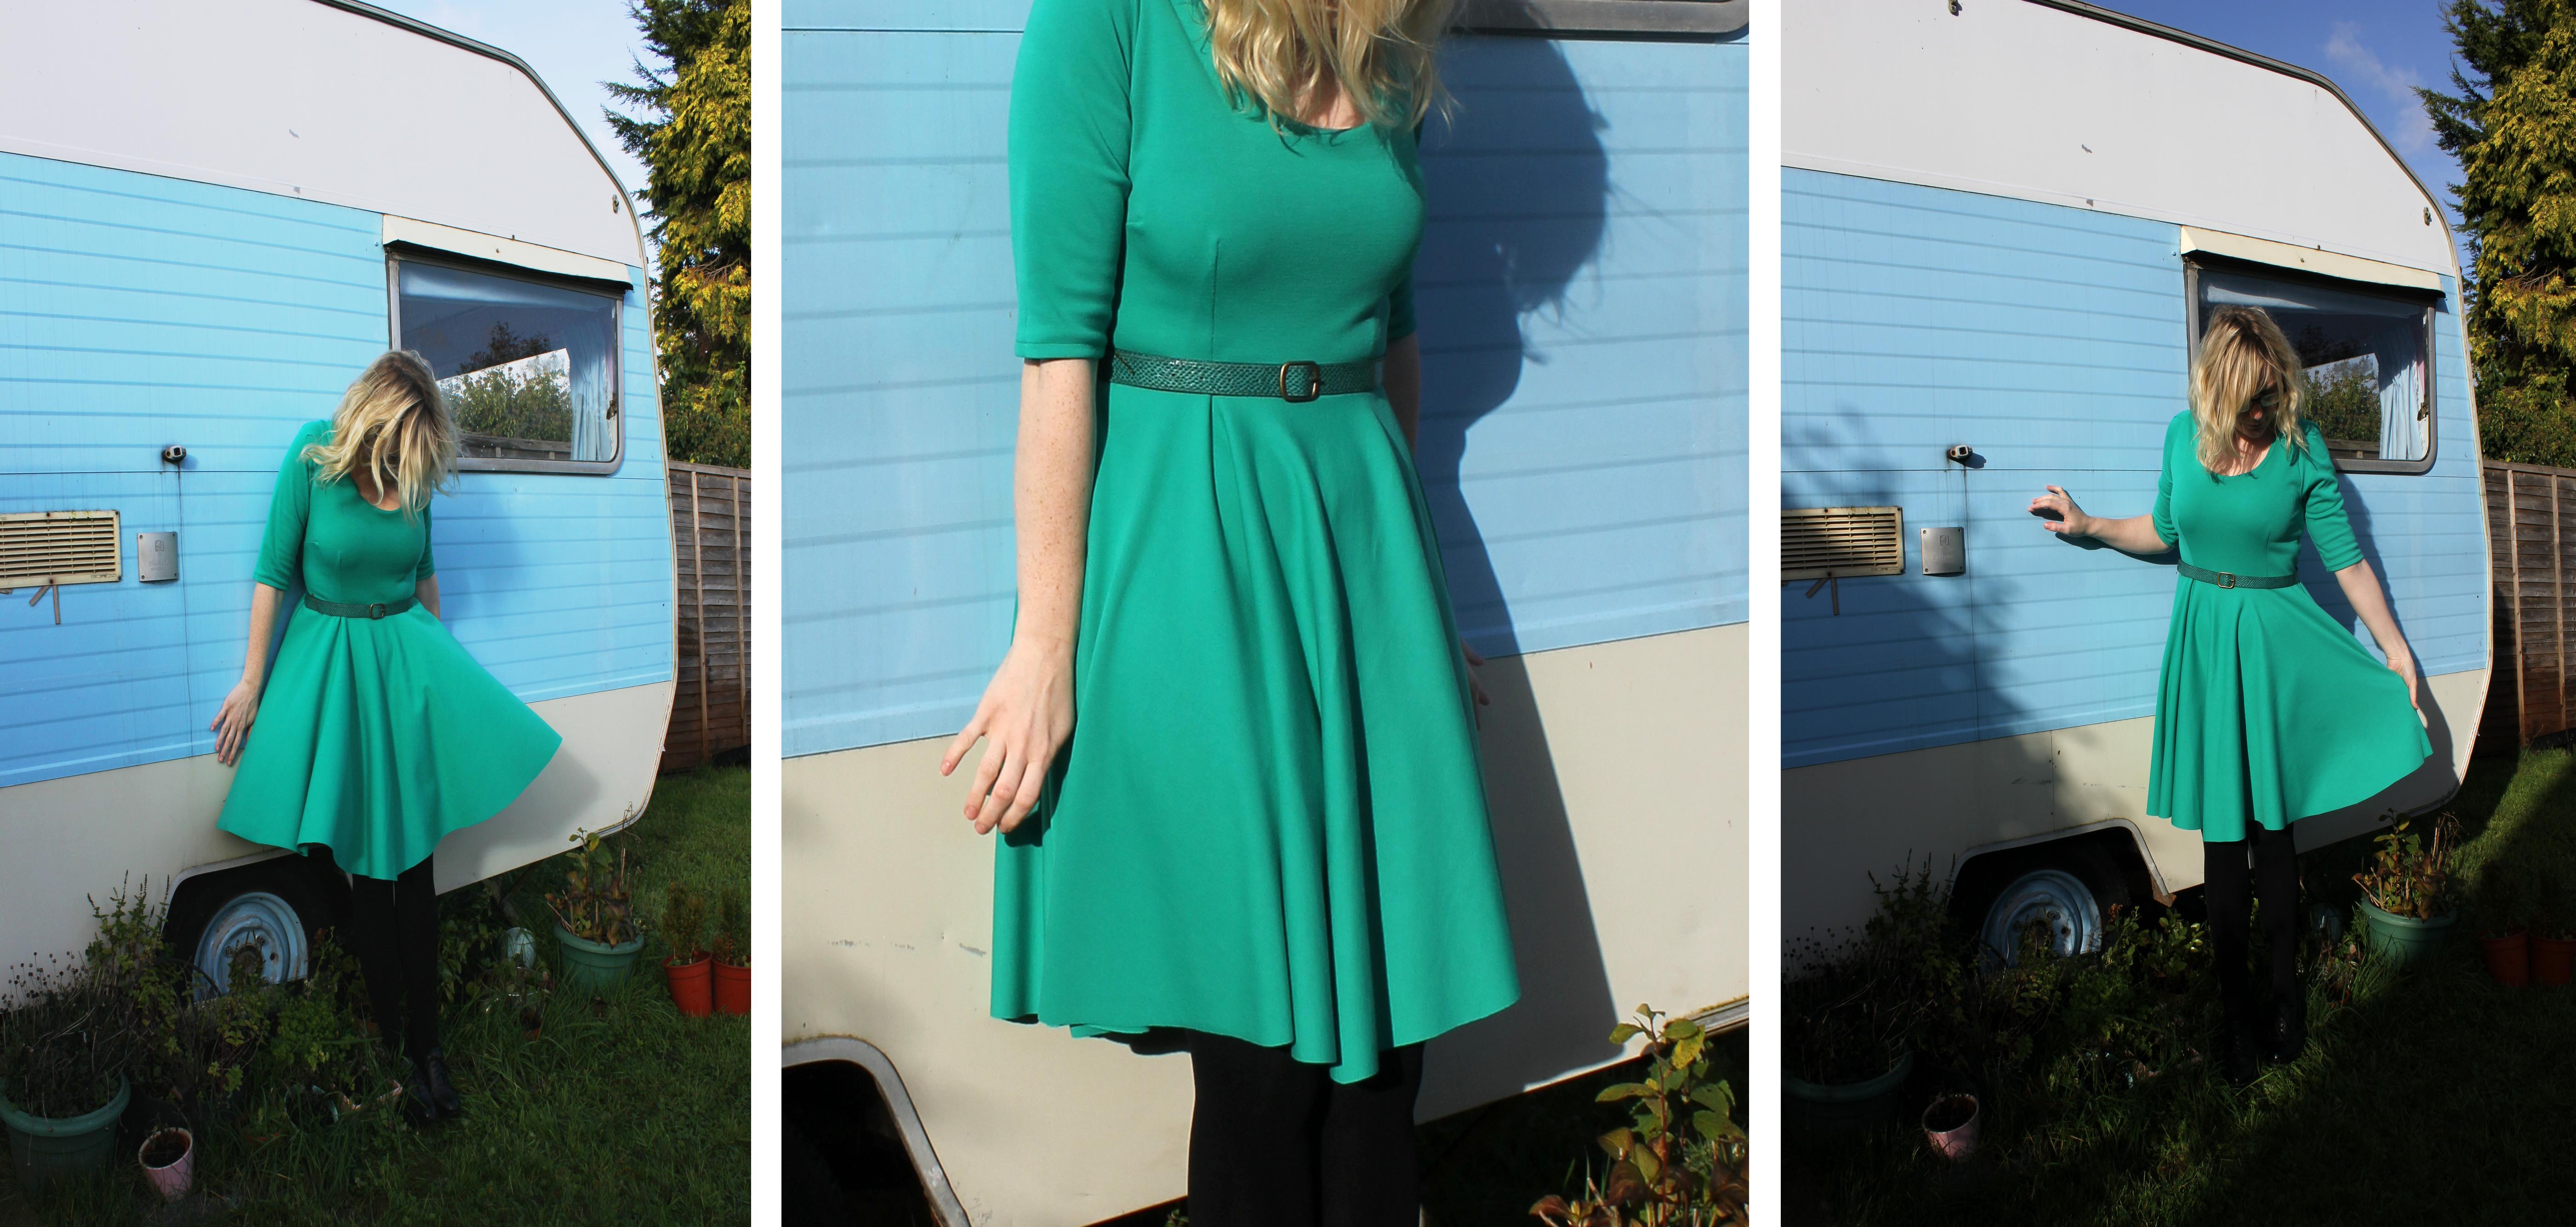 Sew It Yourself SIY emerald green dress handmade using vogue pattern and fabric from Minerva